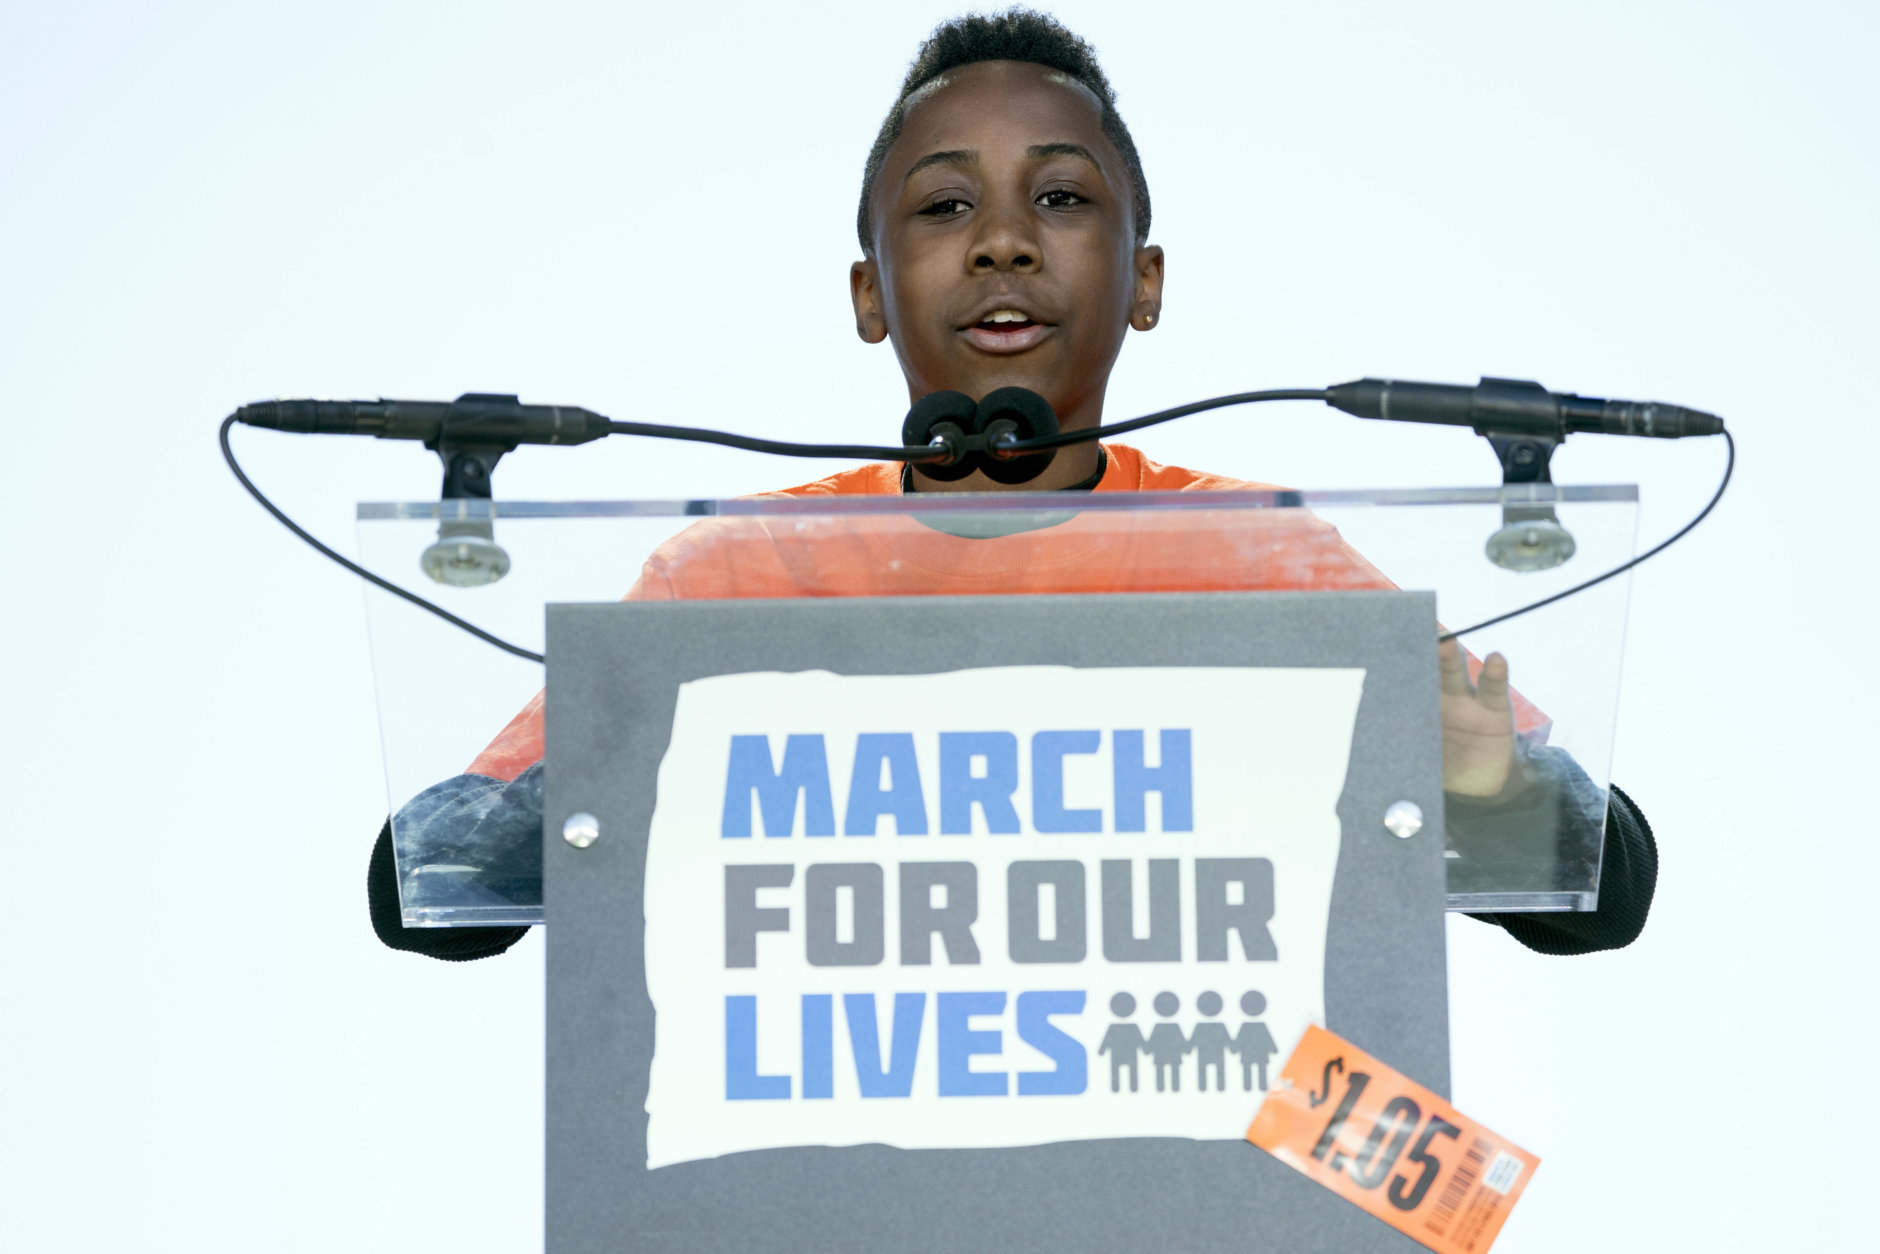 Christopher Underwood, a junior ambassador with Moms Demand Action for Gun Sense in America, who lost his brother to gun violence in the Brooklyn borough of New York in 2012, speaks during the "March for Our Lives" rally in support of gun control in Washington, Saturday, March 24, 2018. (AP Photo/Andrew Harnik)